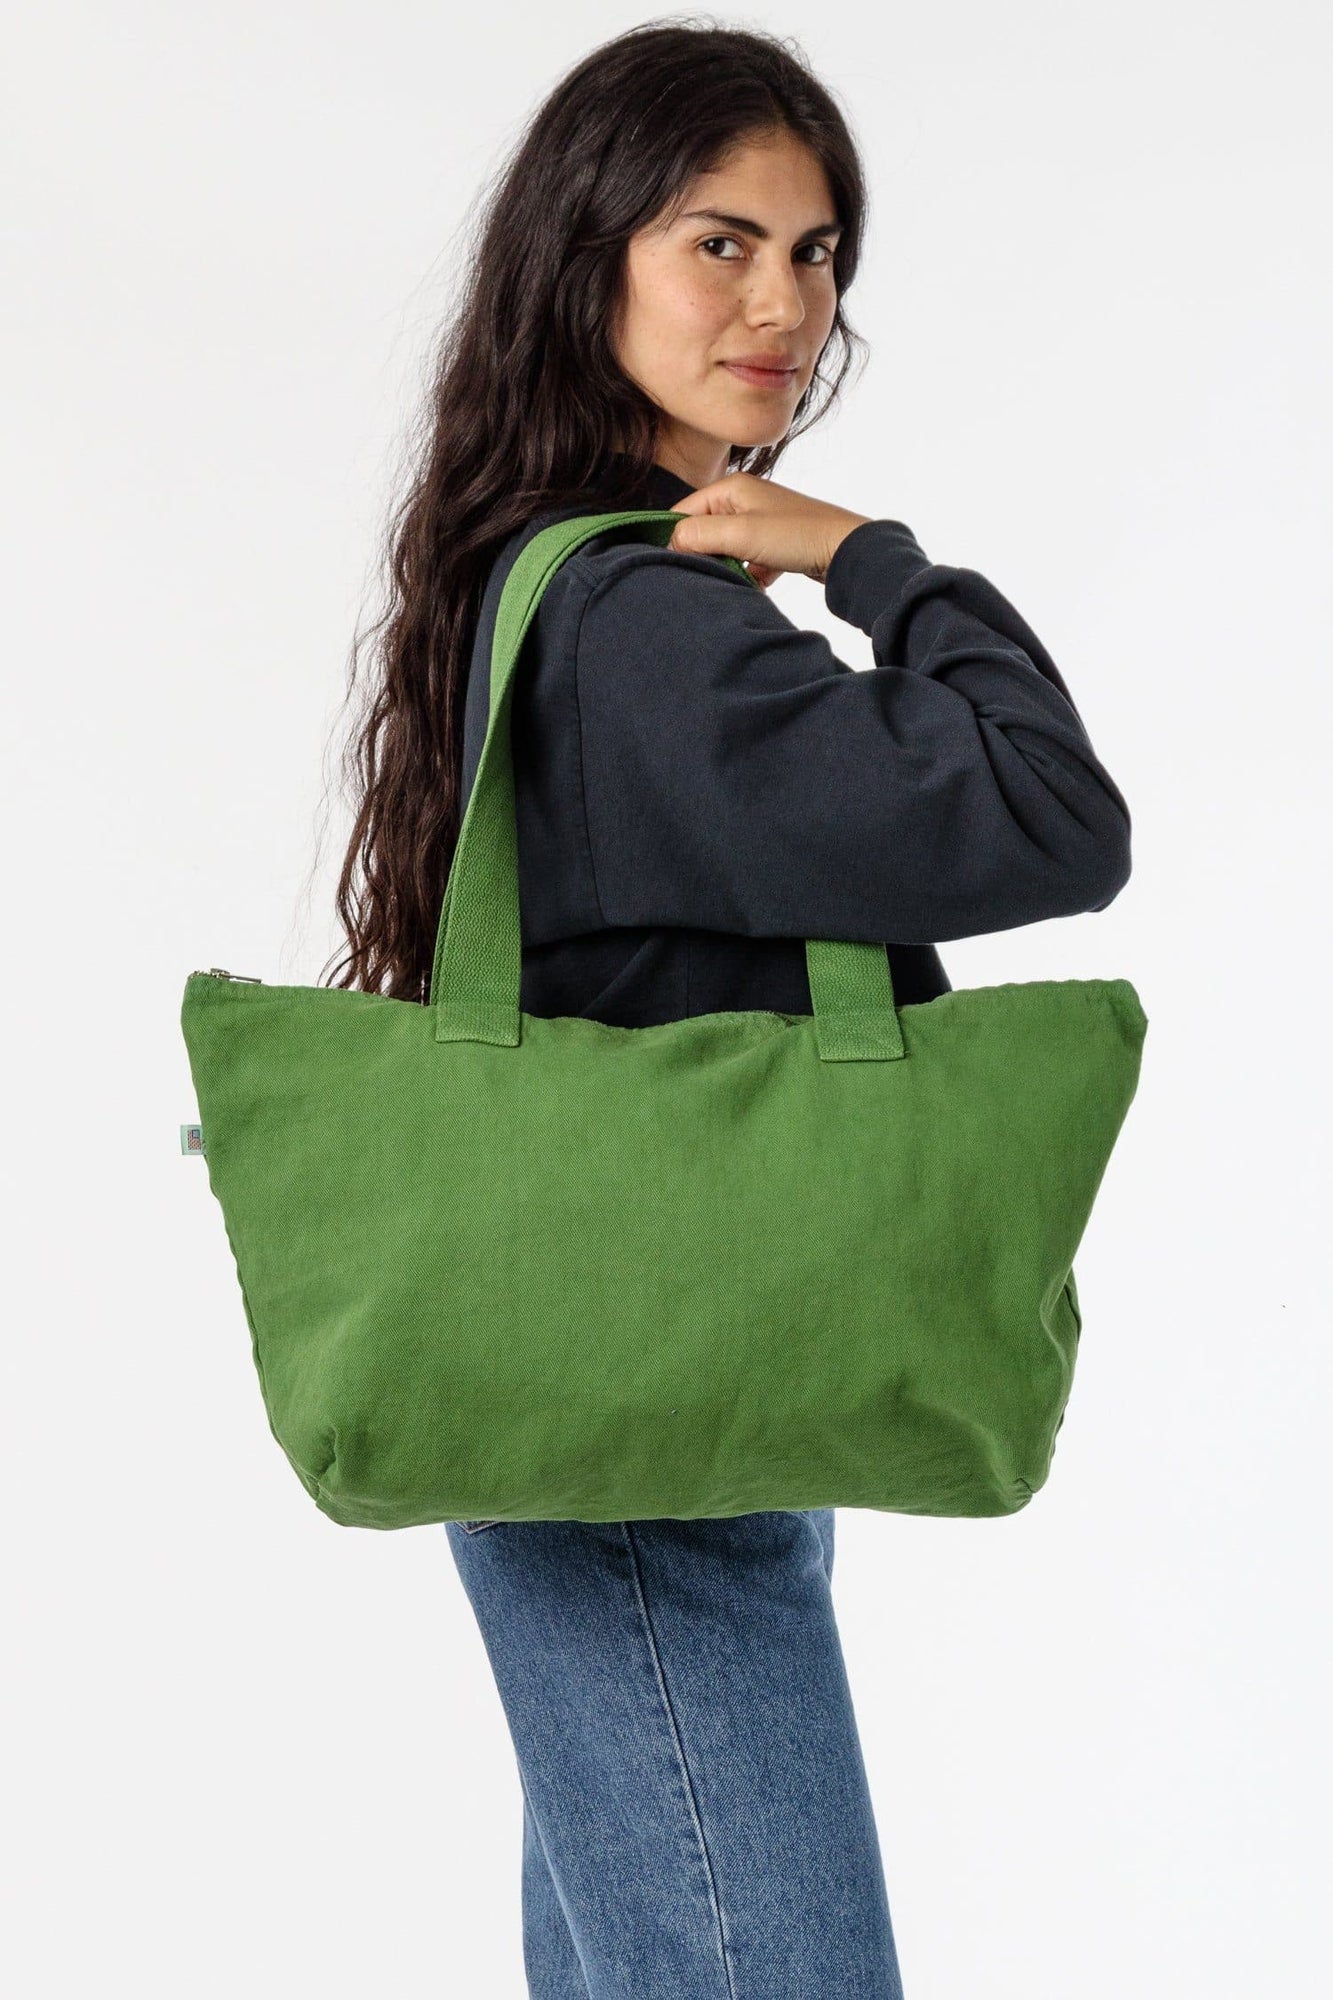 Download BD06 - Carry All Zip Tote - Los Angeles Apparel